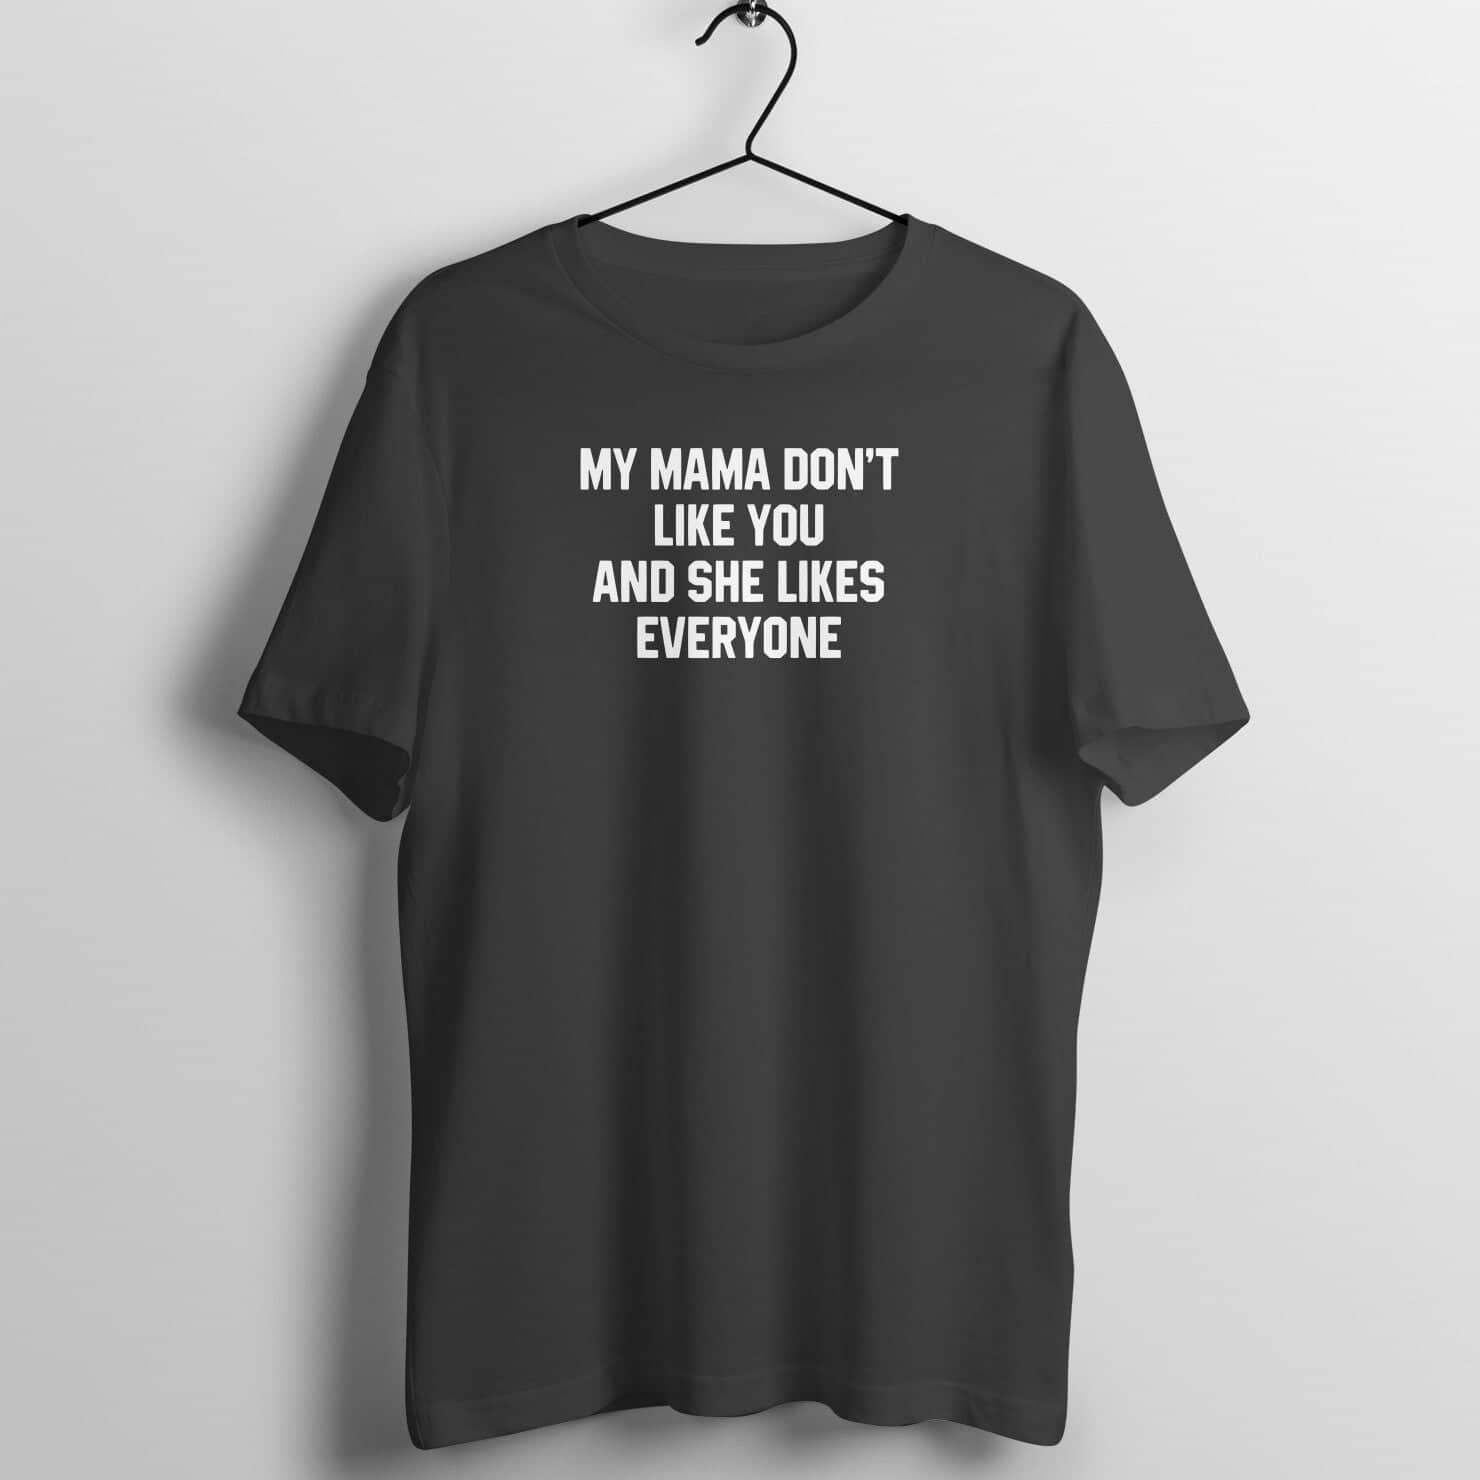 My Mama Don't Like You and She Likes Everyone Exclusive T Shirt for Men and Women freeshipping - Catch My Drift India